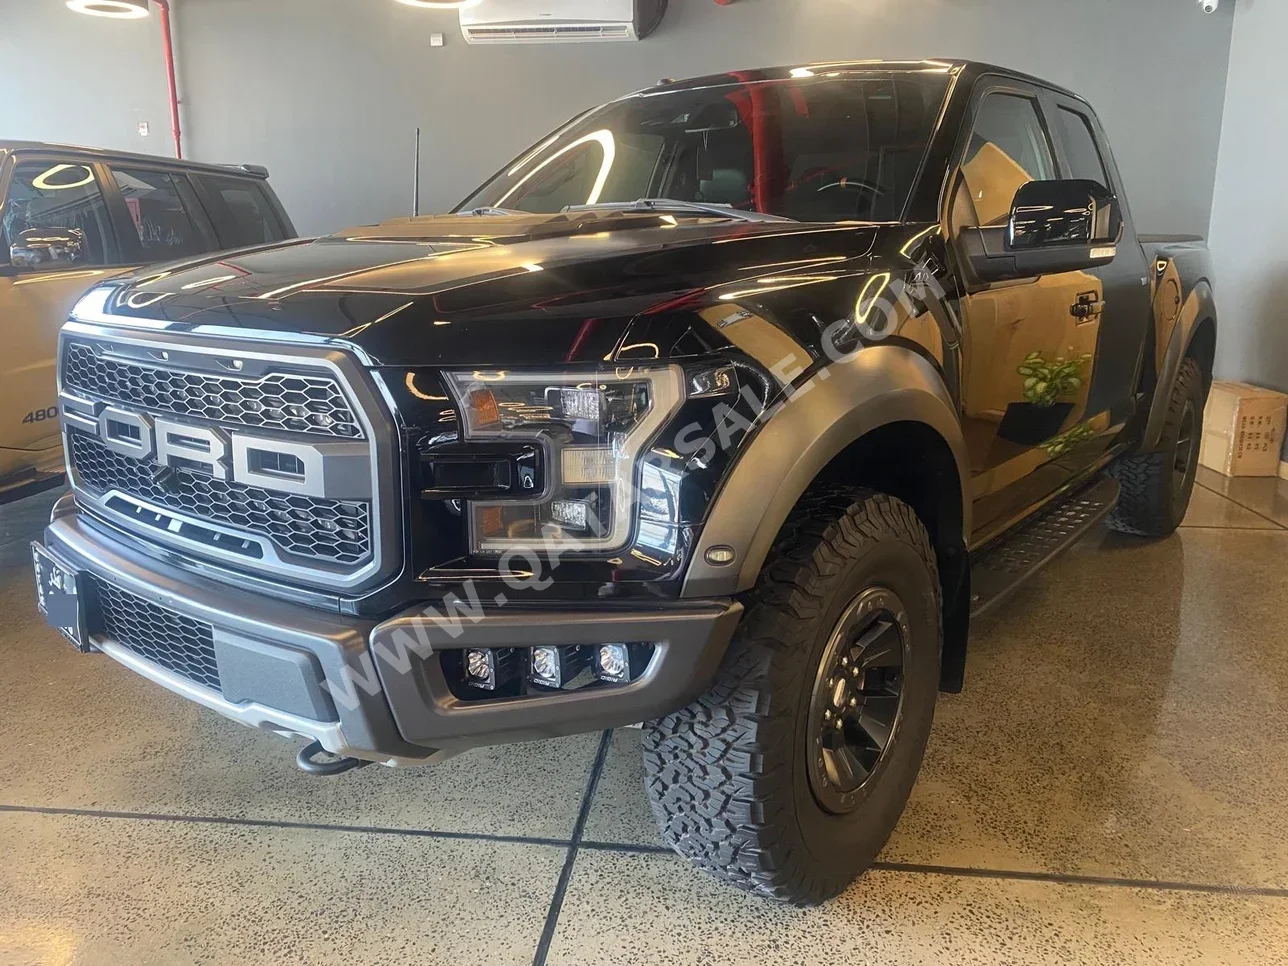 Ford  Raptor  2018  Automatic  138٬000 Km  6 Cylinder  Four Wheel Drive (4WD)  Pick Up  Black  With Warranty